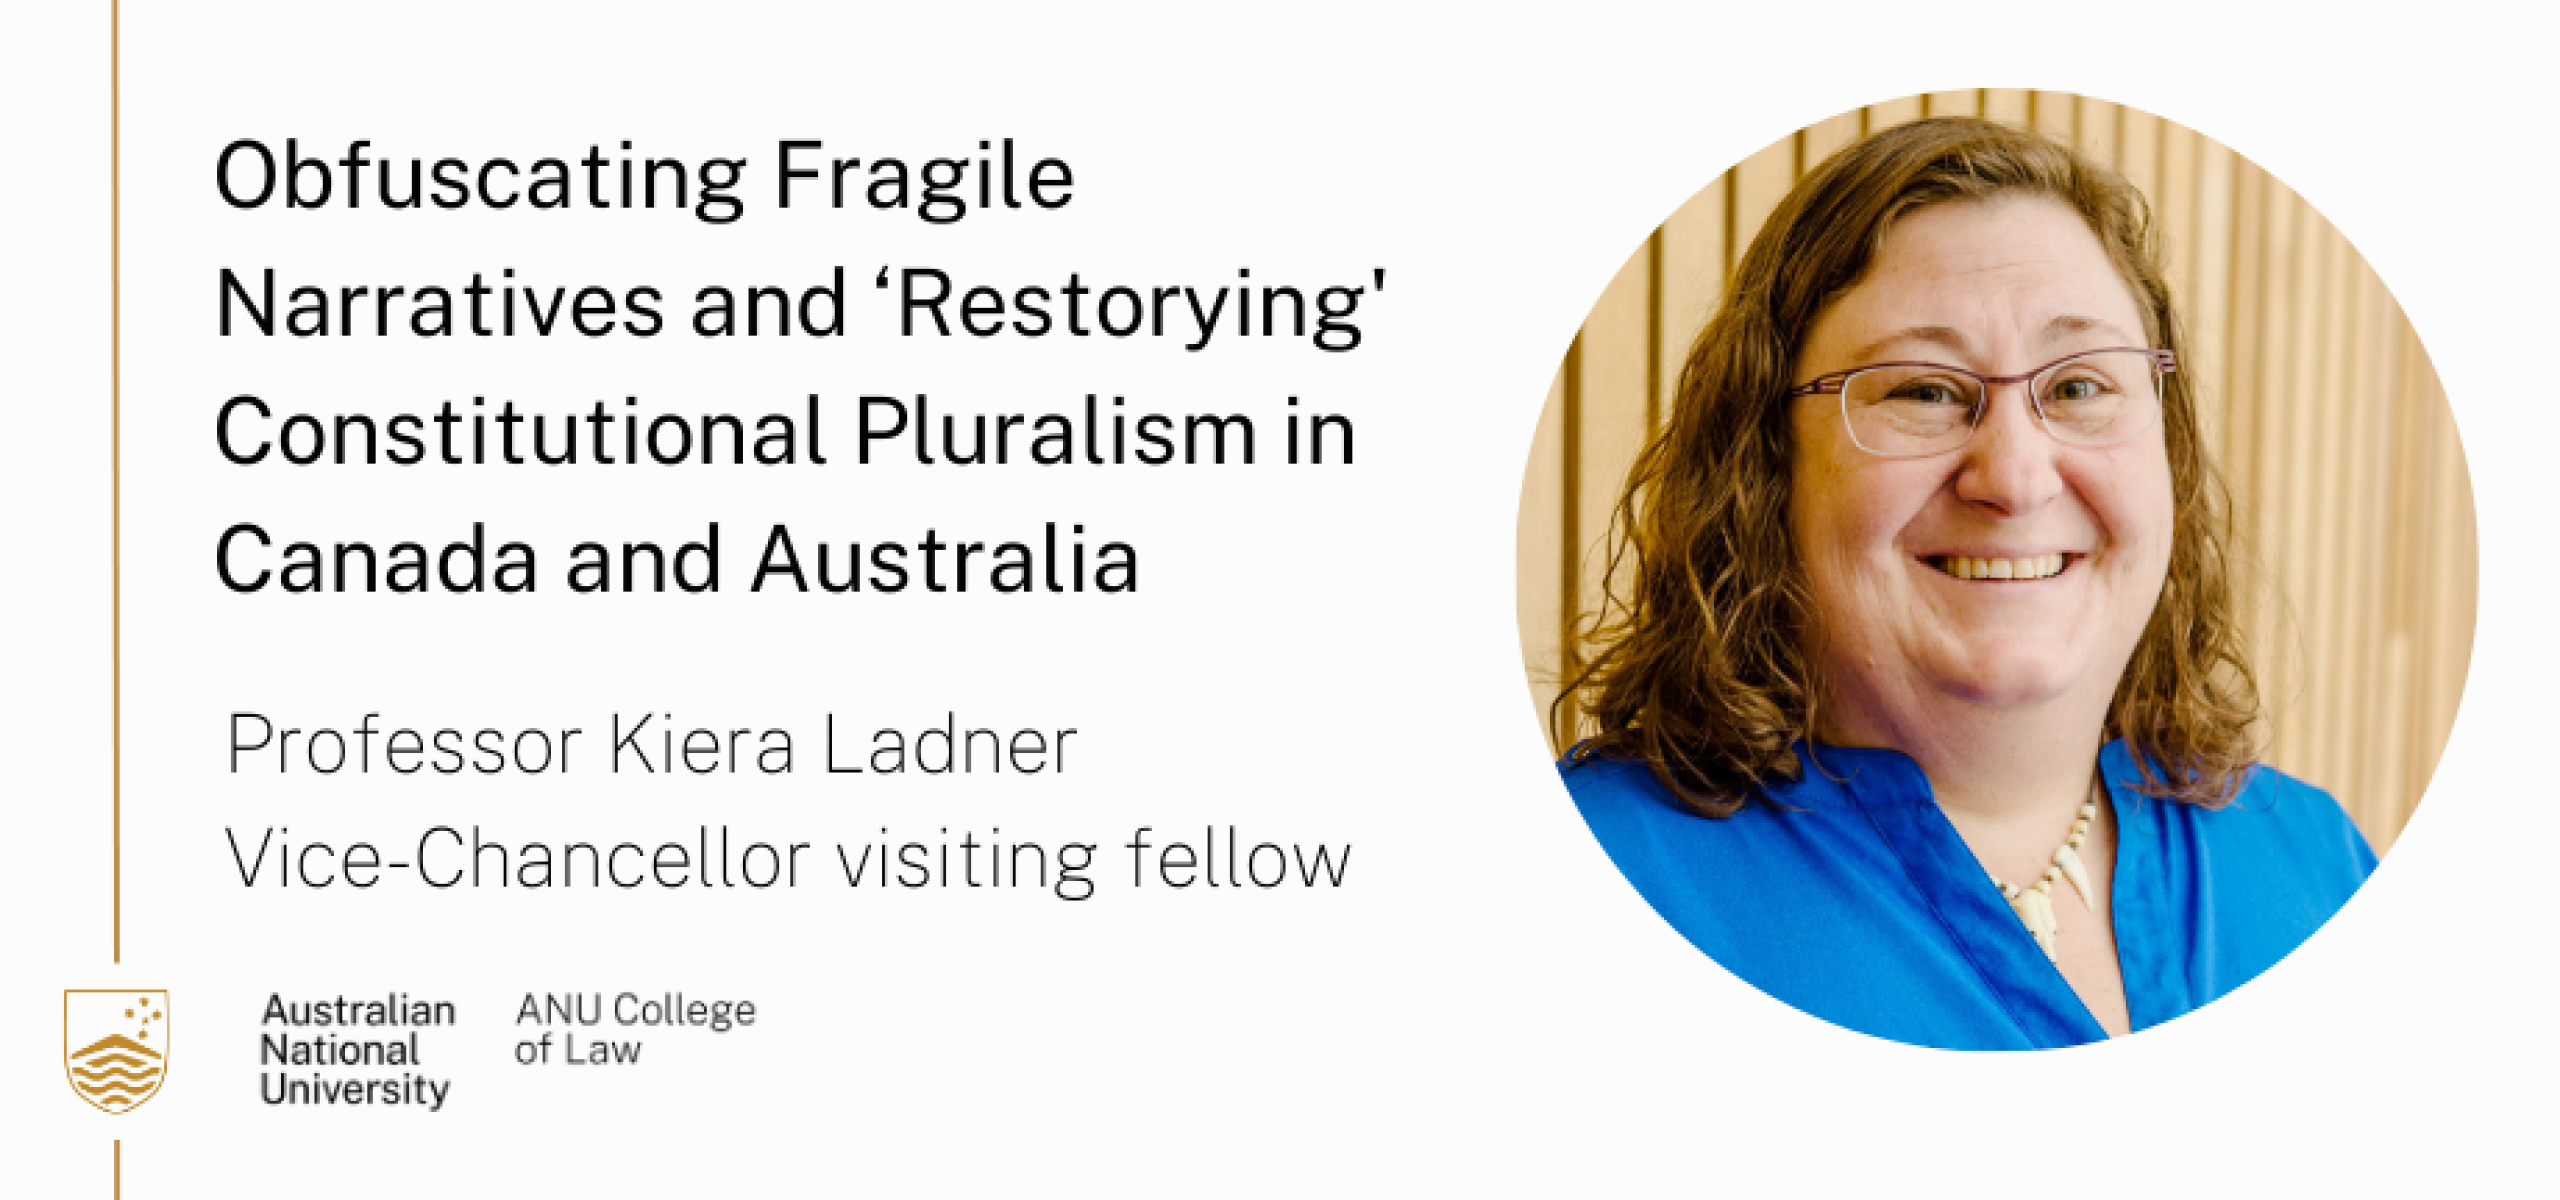 Obfuscating Fragile Narratives and ‘Restorying' Constitutional Pluralism in Canada and Australia